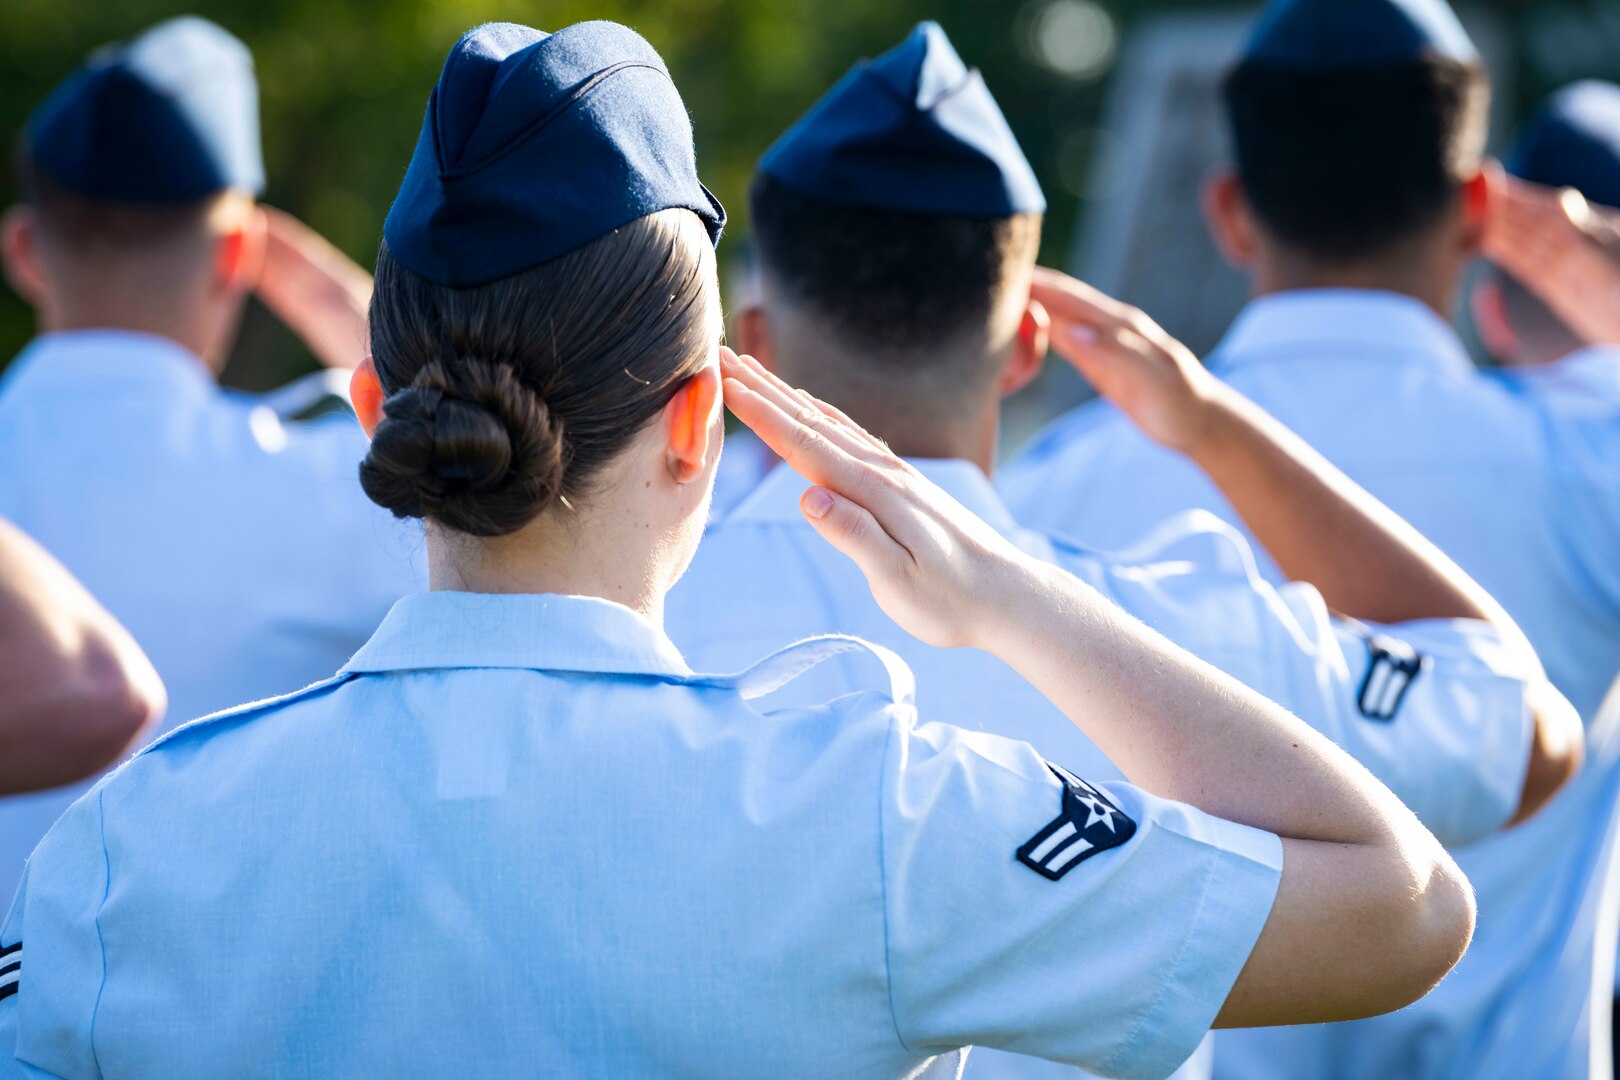 Airmen, shown from behind, stand outside in formation and salute.